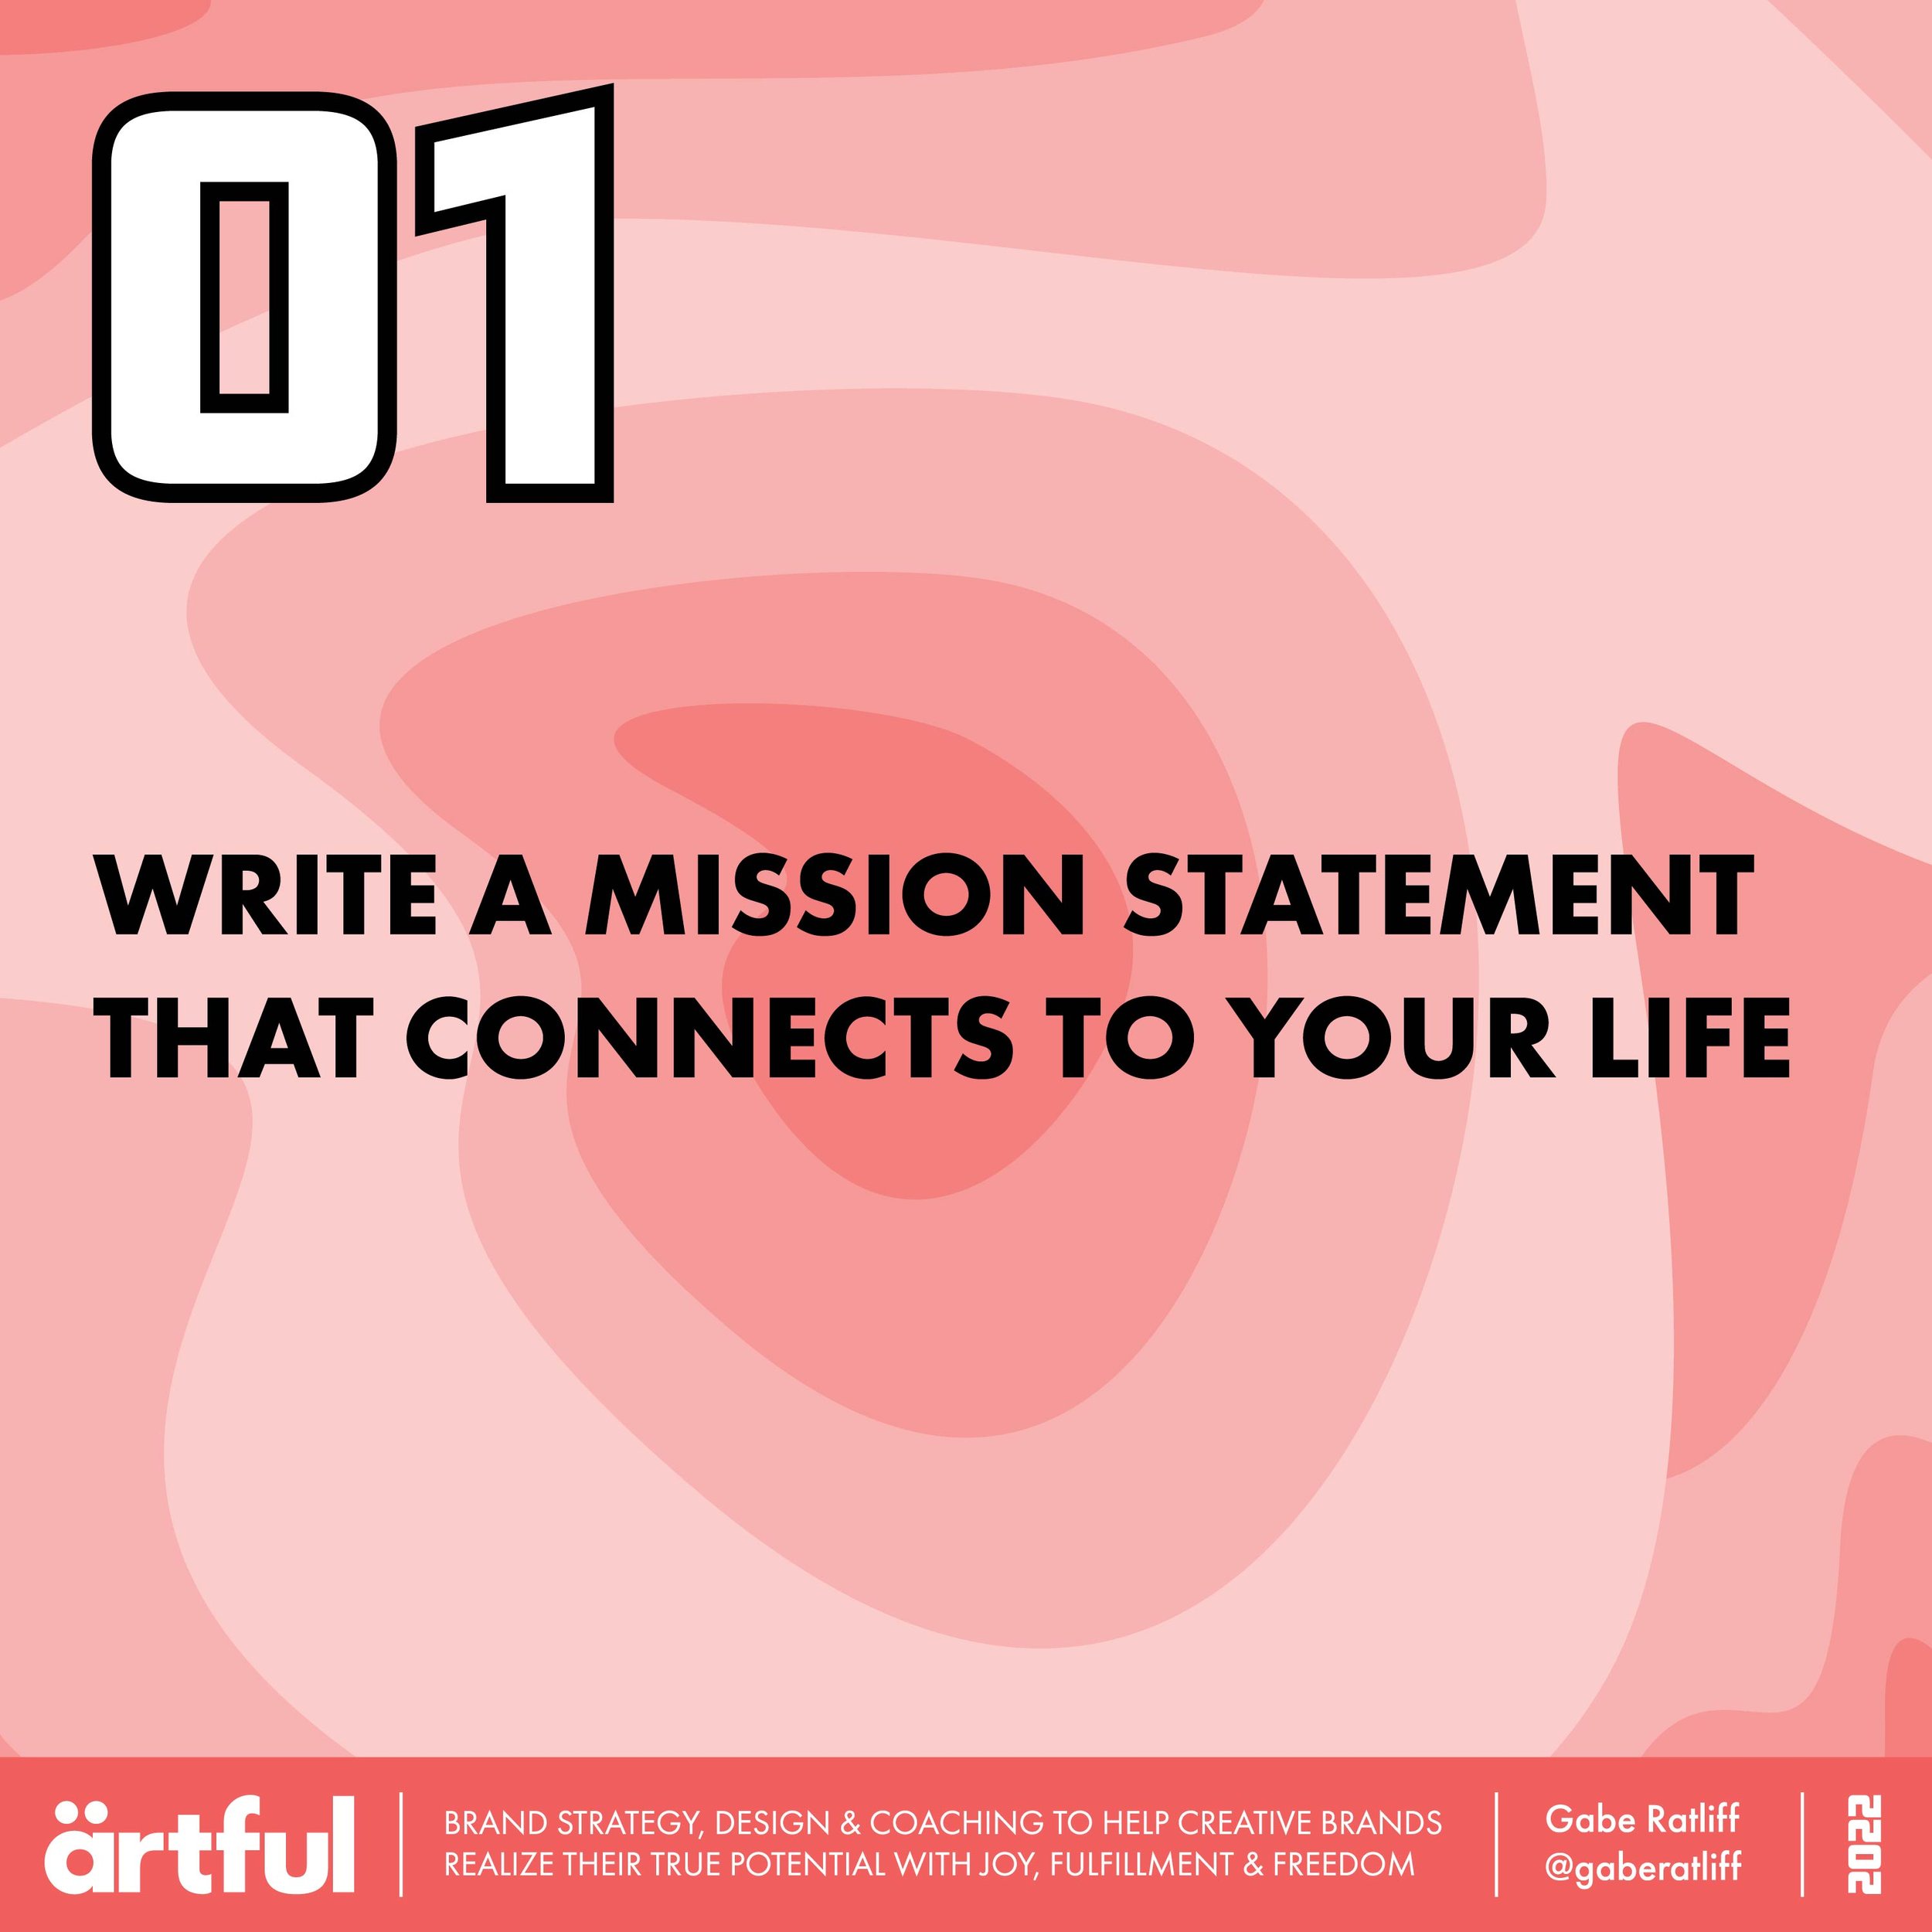 Write a Mission Statement that connects to your life